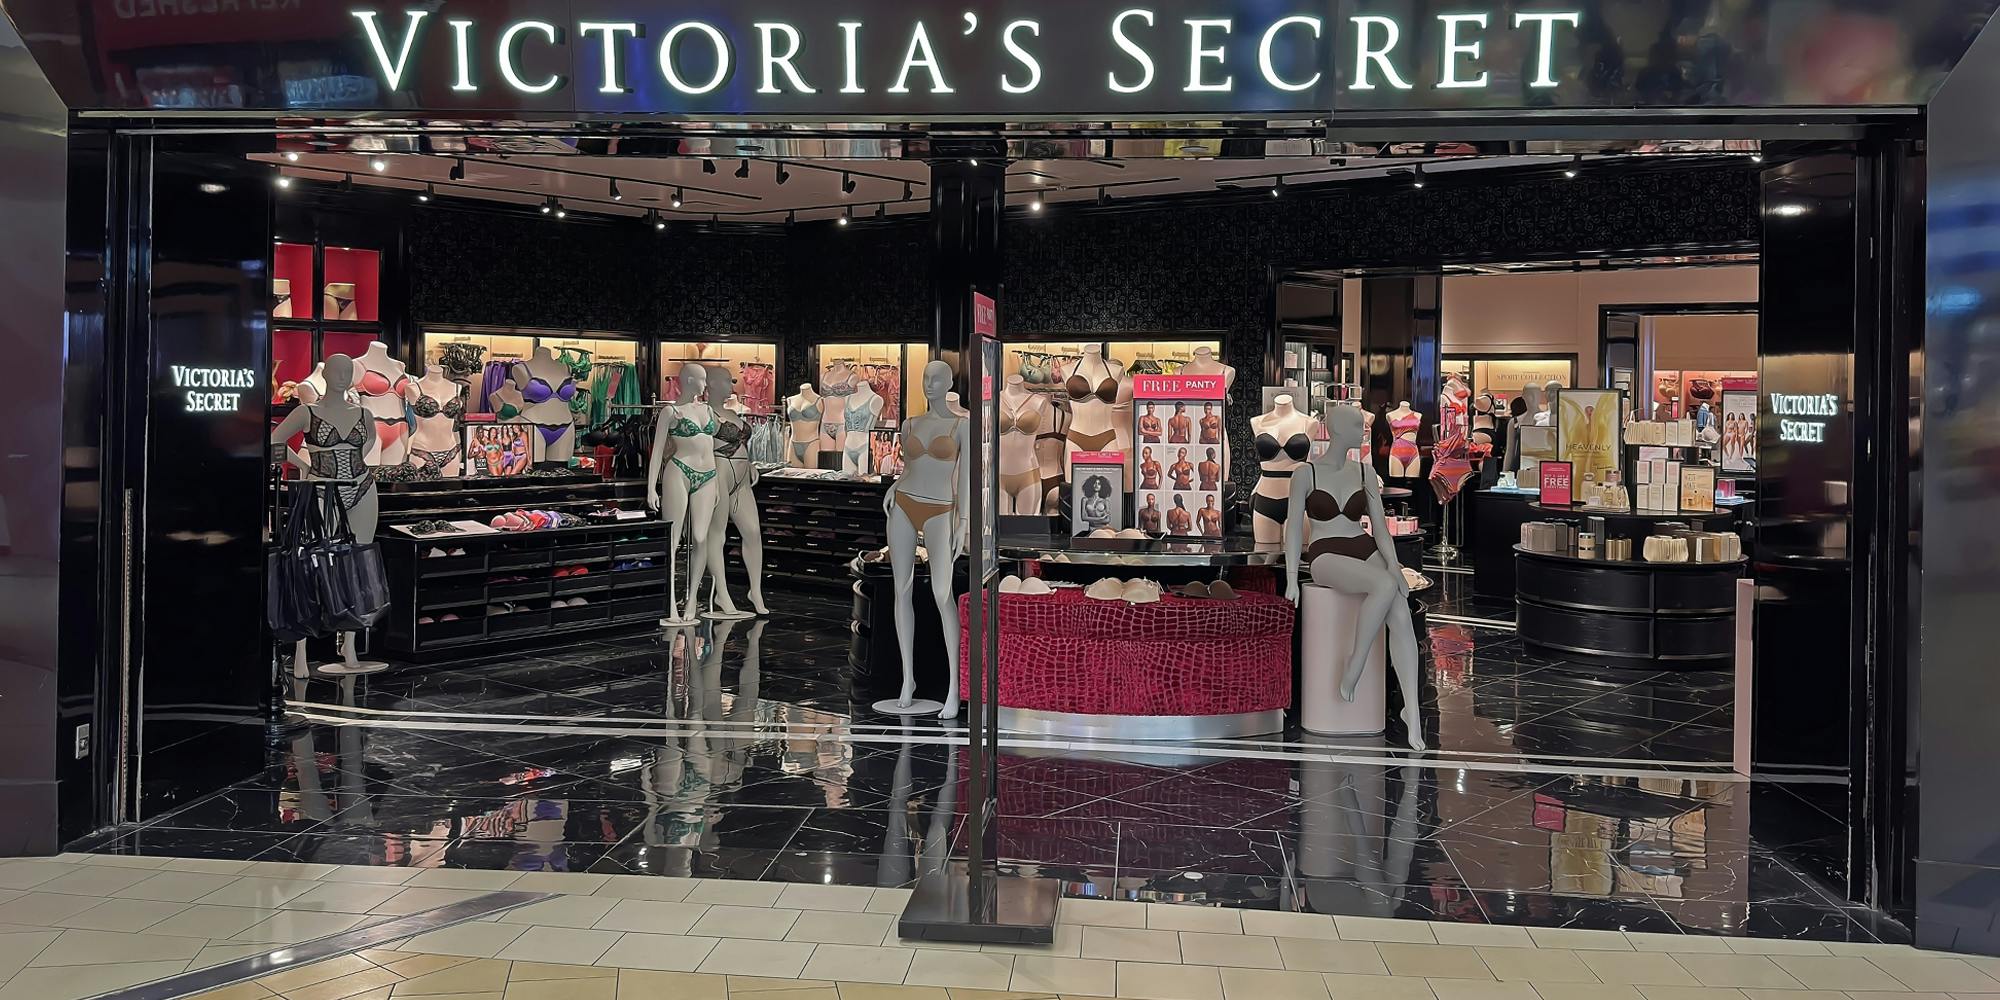 Confessions of a Former Victoria's Secret Employee, by Kiki Joy